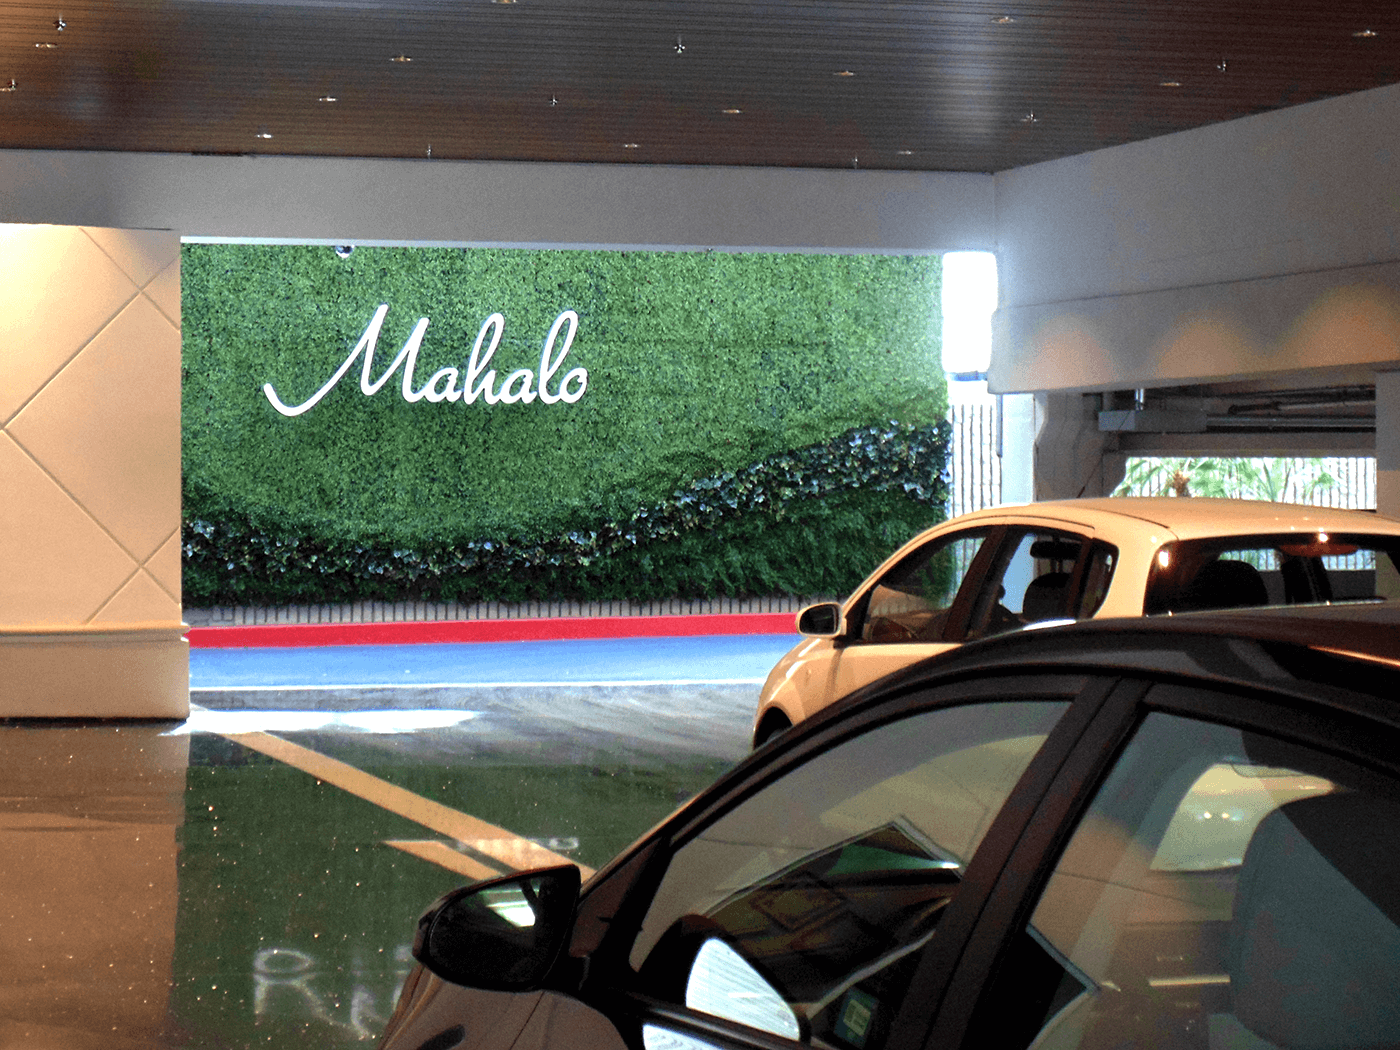 View inside parking structure of Mahalo Green Wall at California Hotel Las Vegas